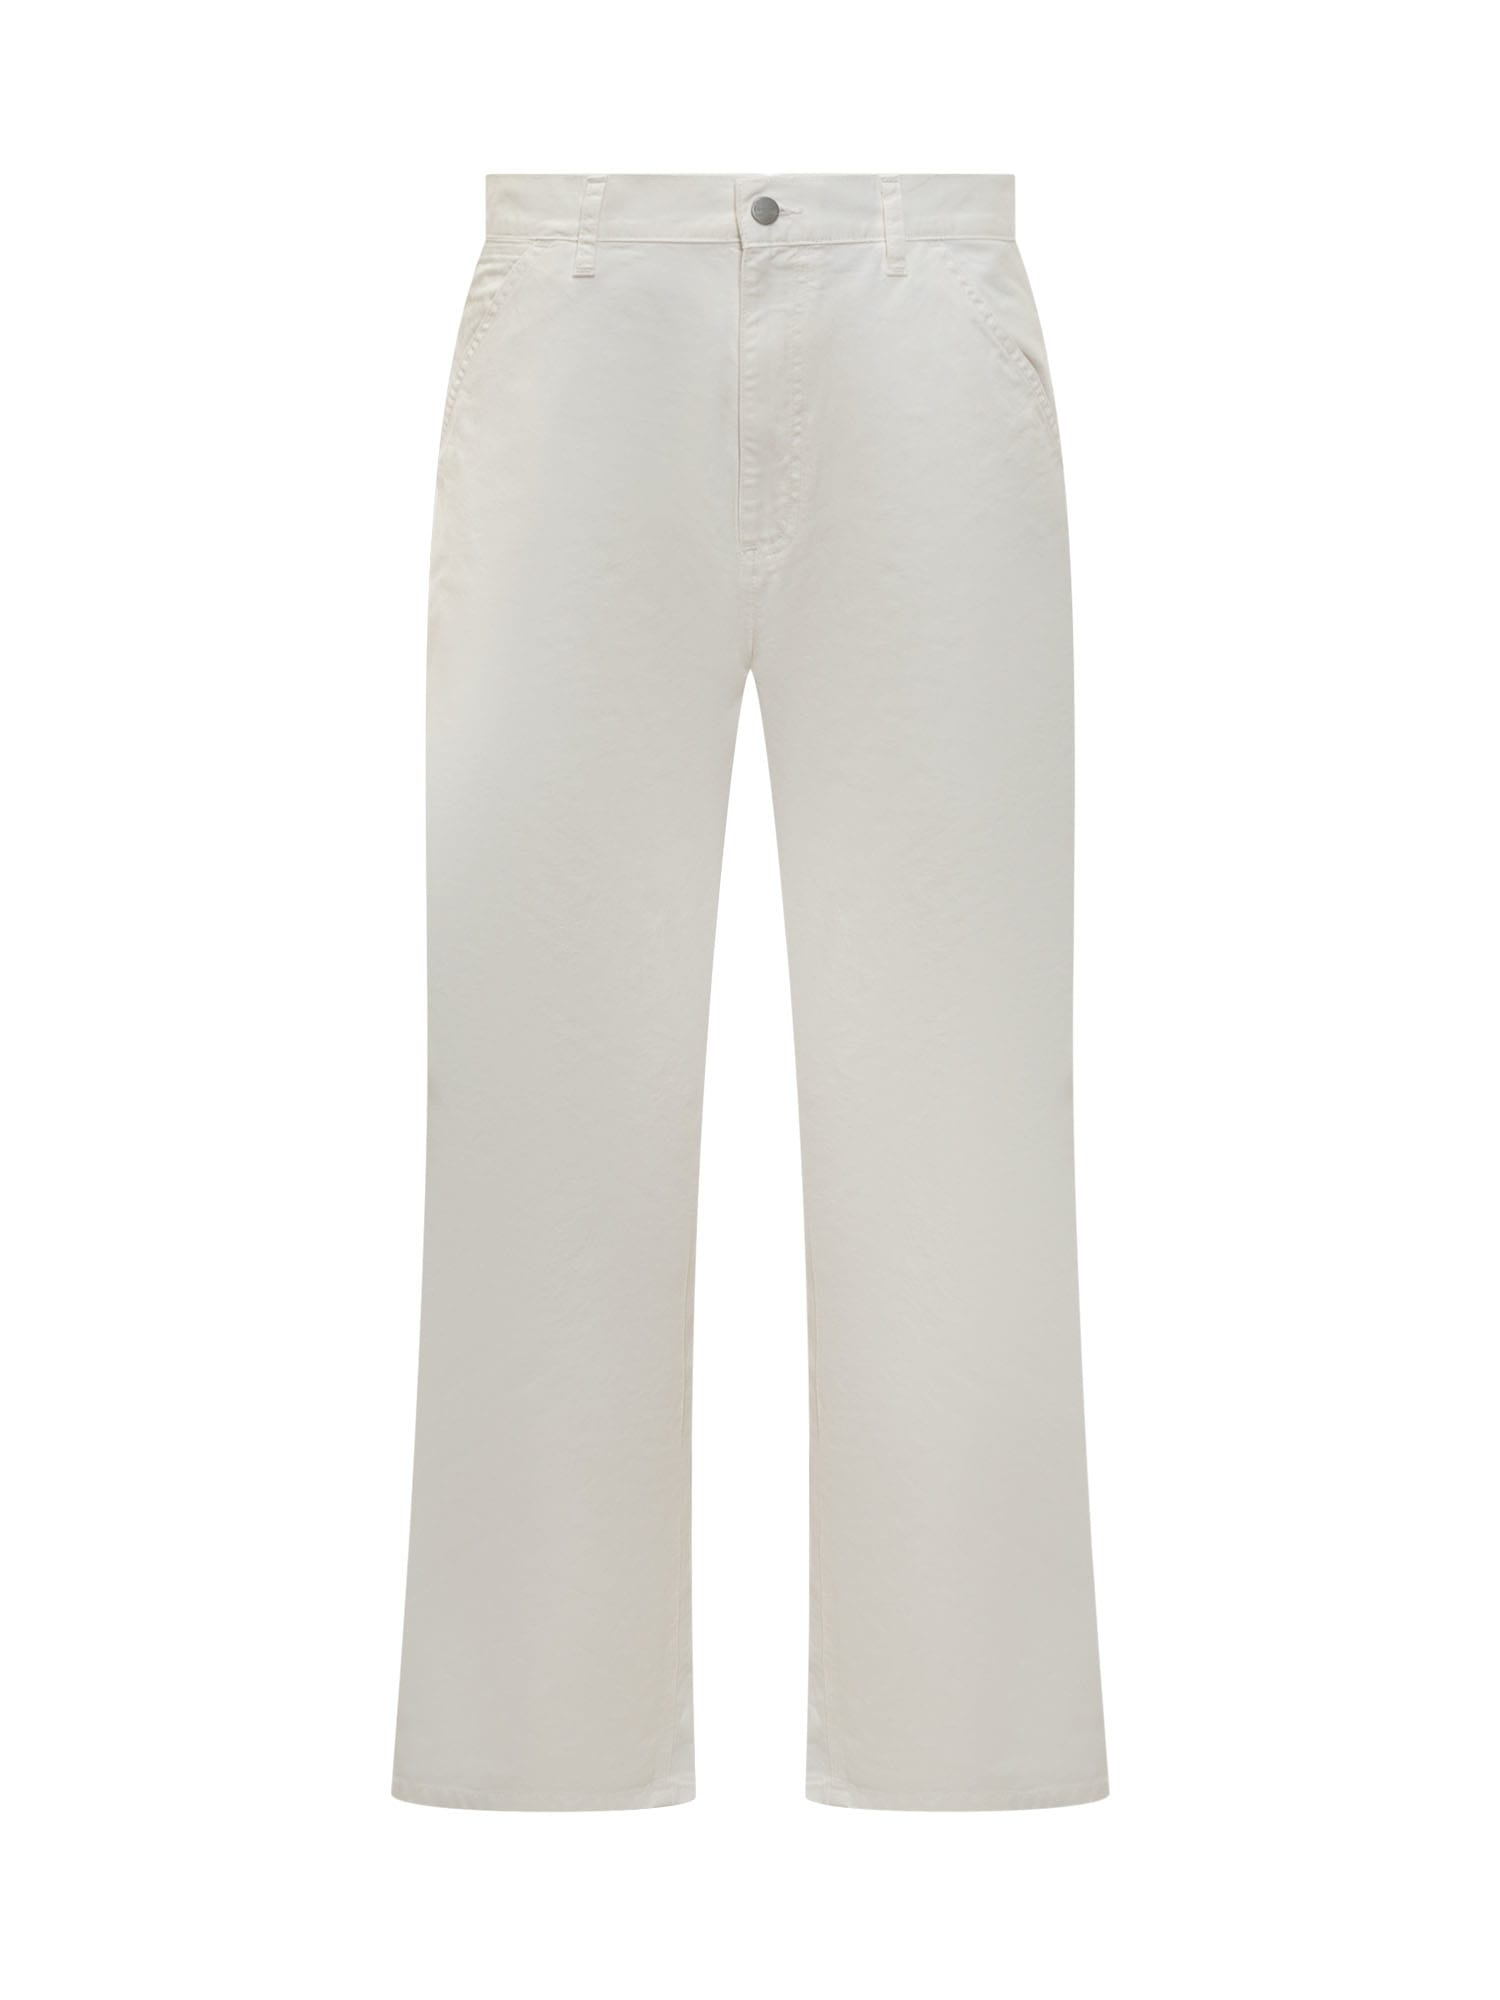 Carhartt Cotton Pants With Logo In Off White Rinsed